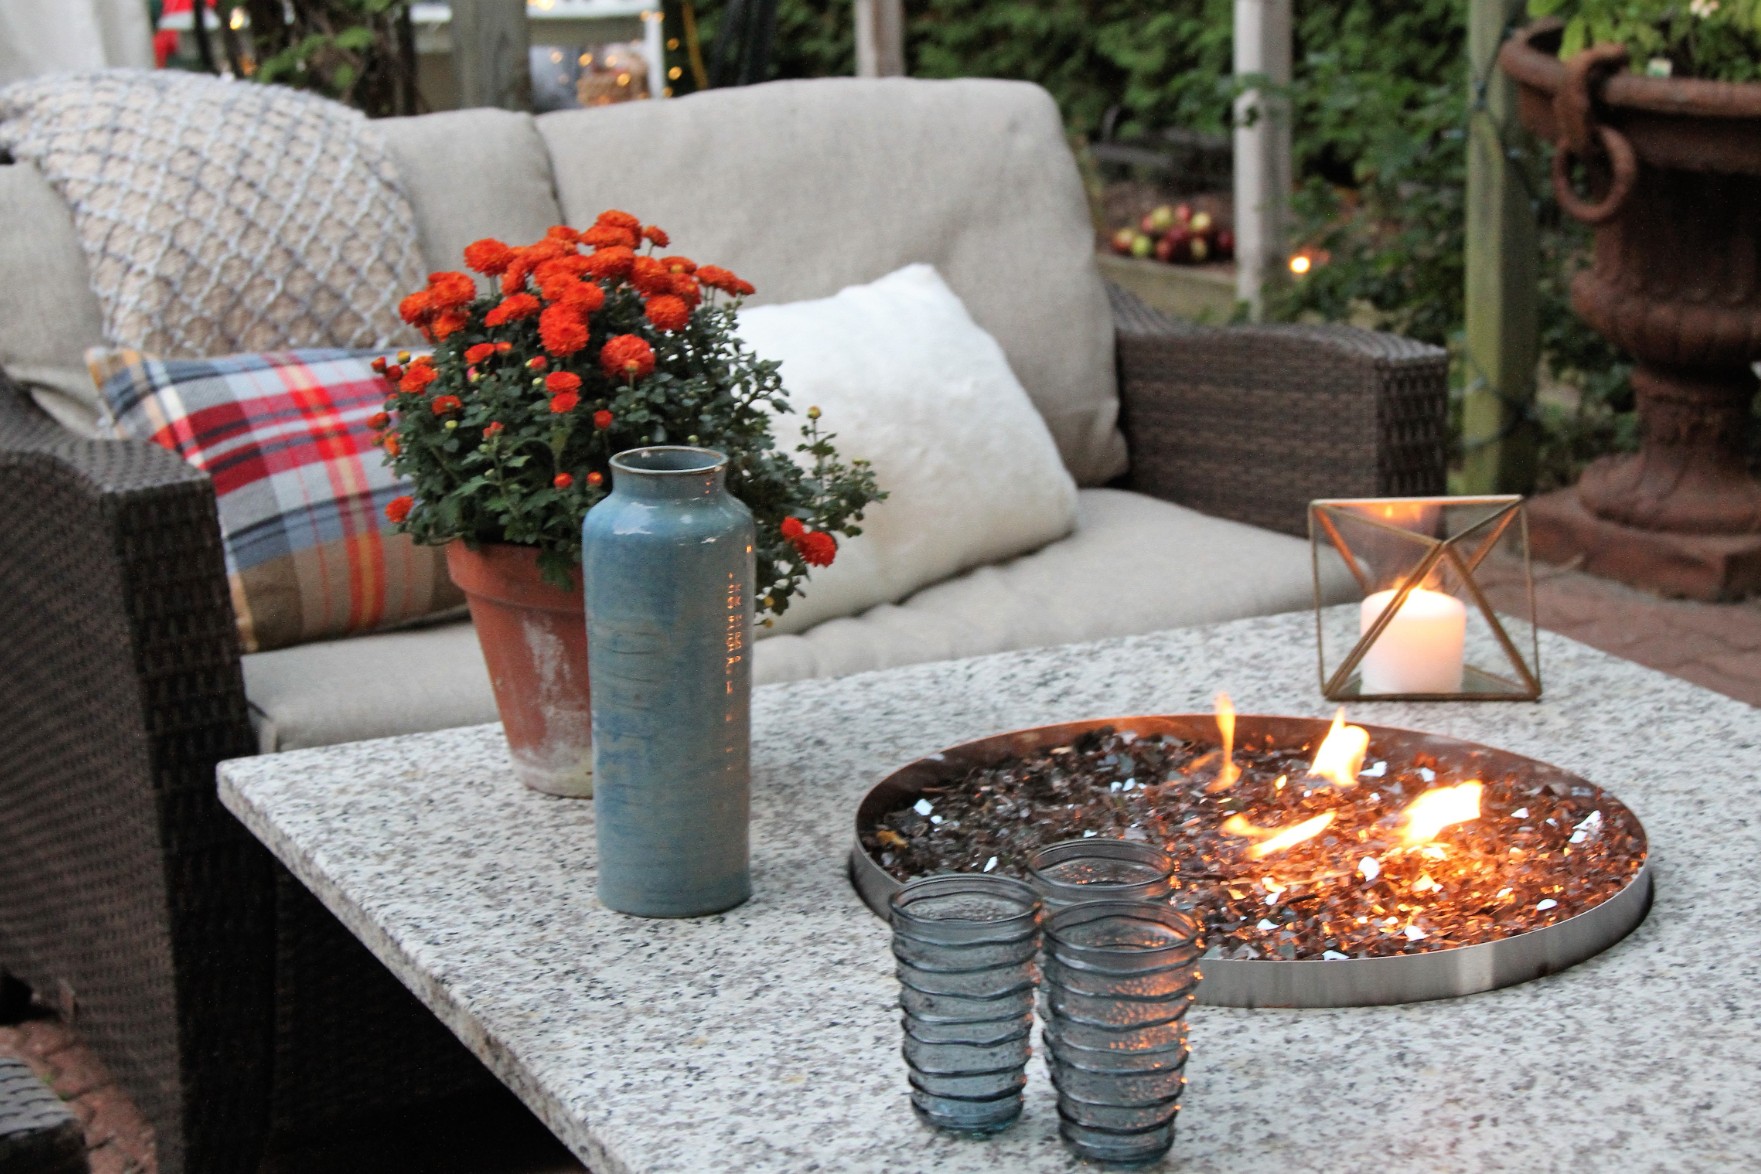 Patio with table, fire pit, and padded chair,